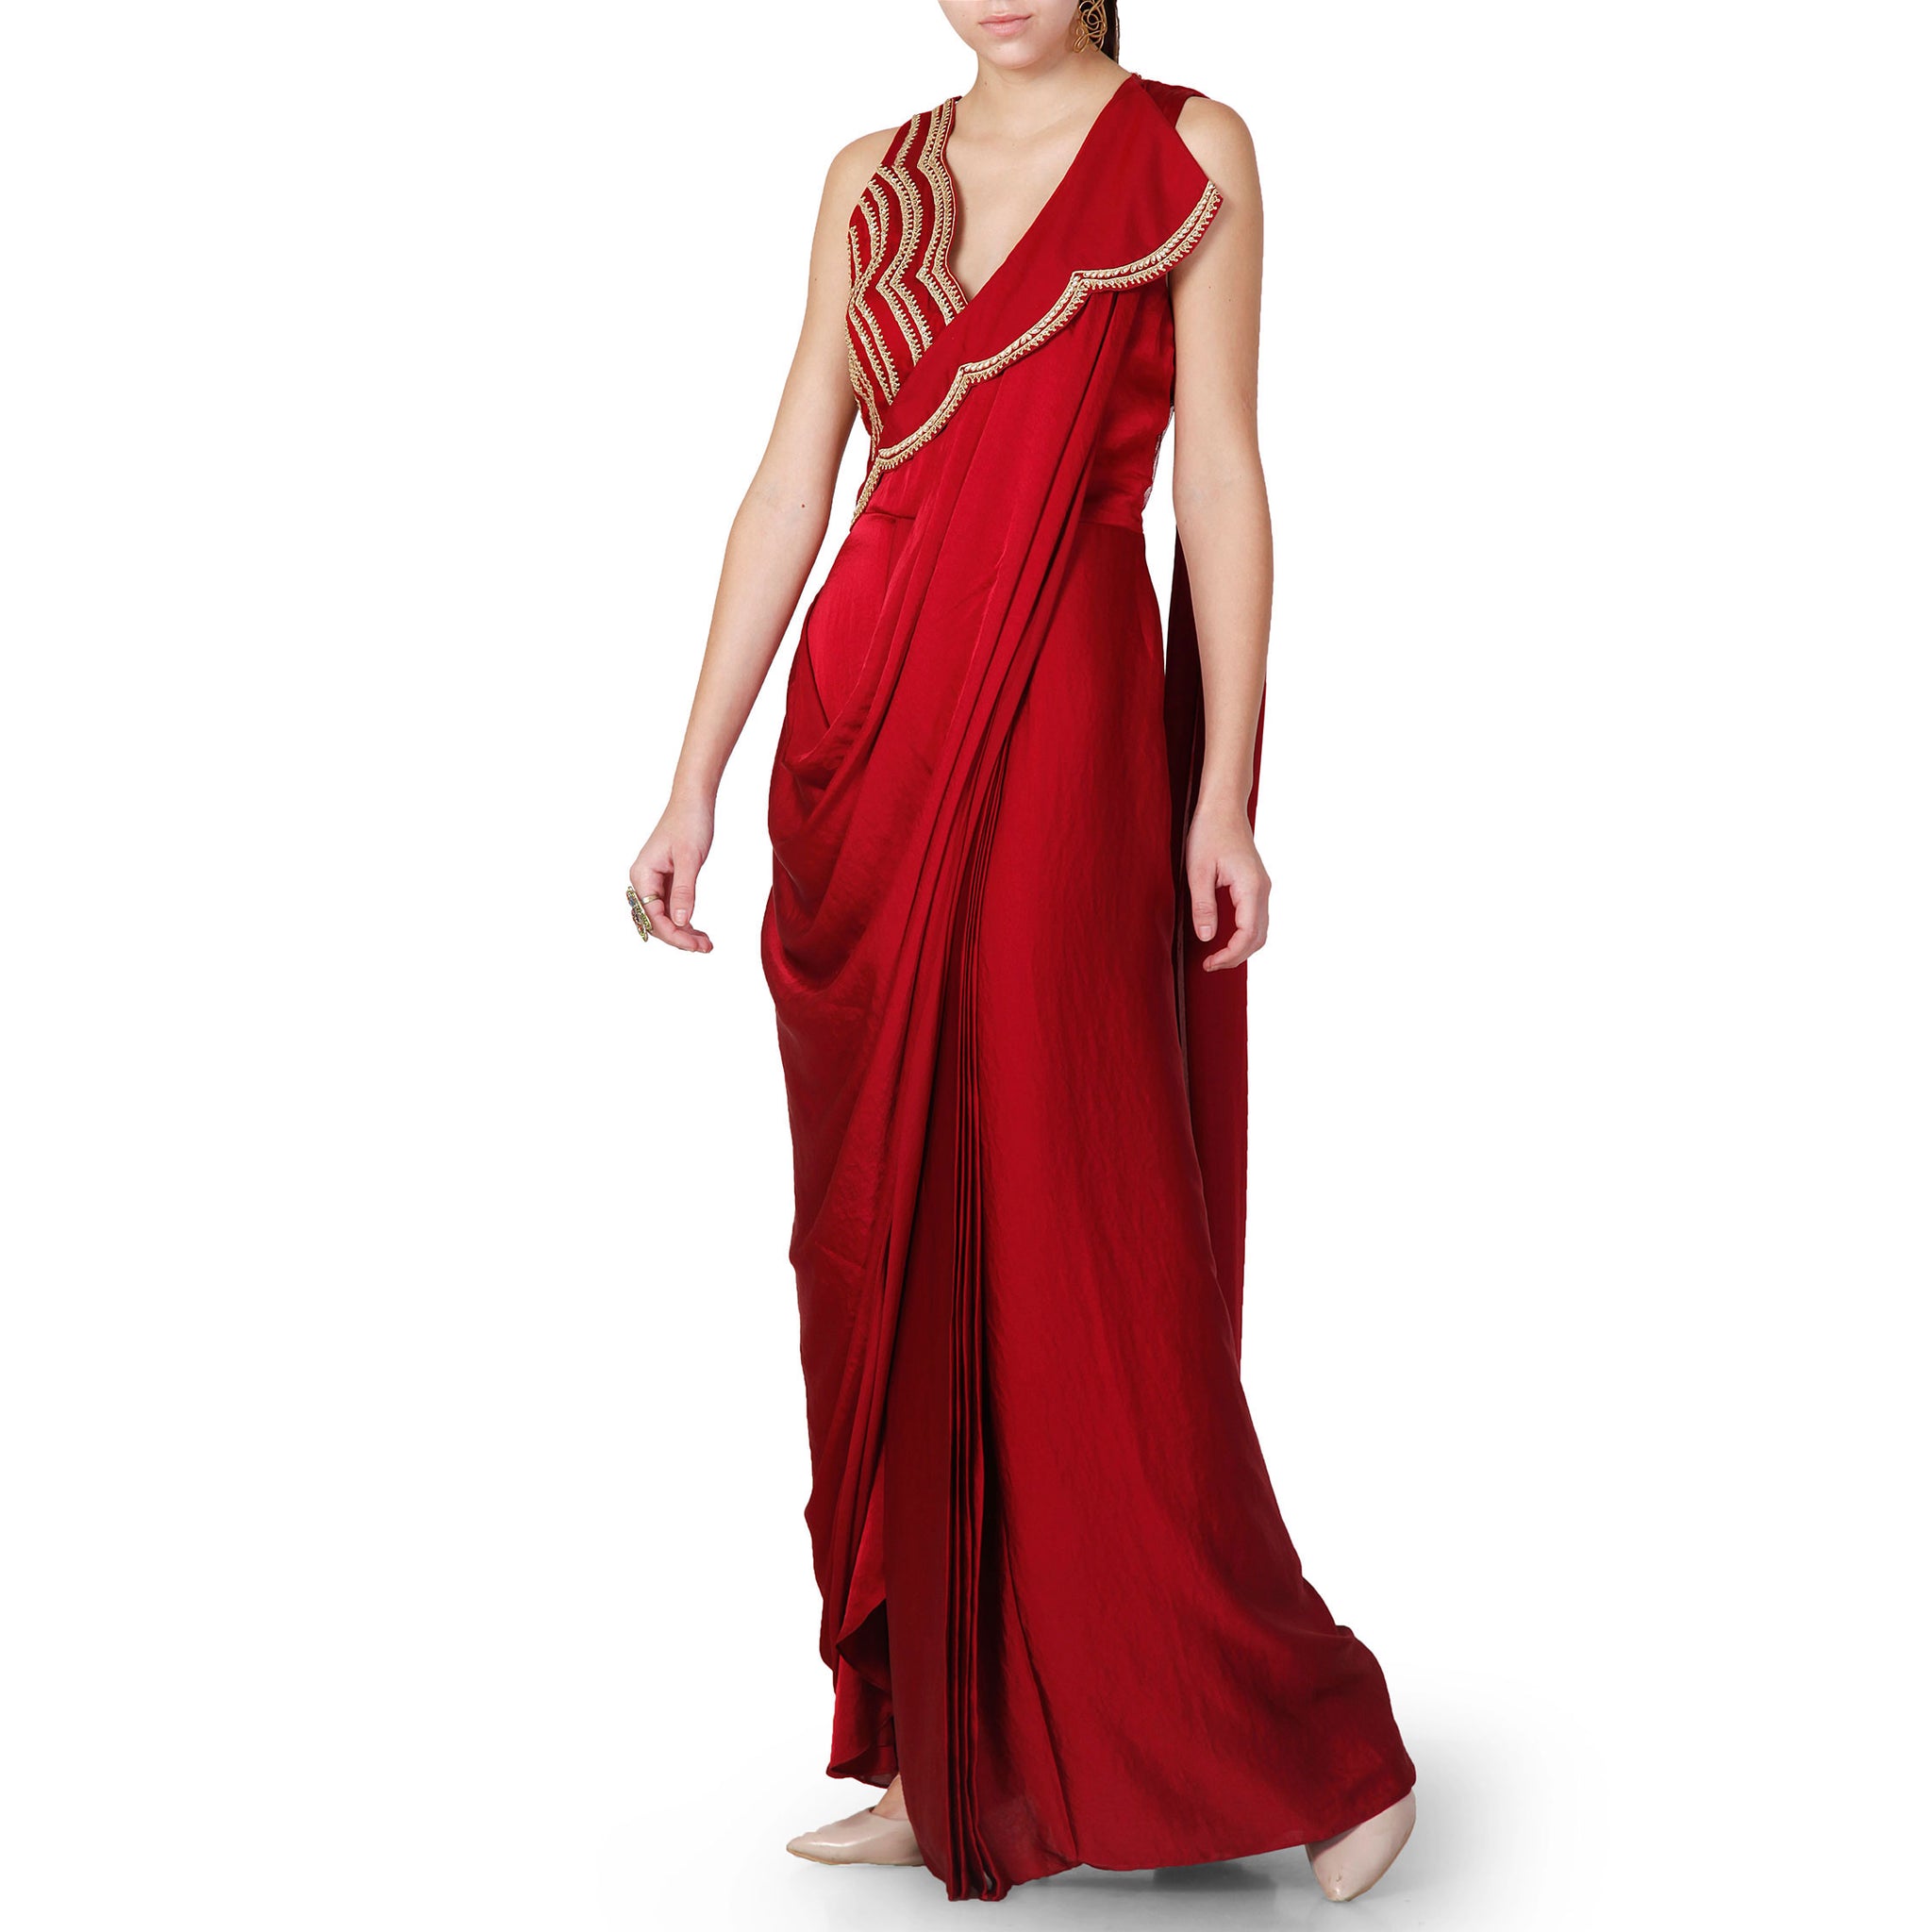 Embroidered Pre-Draped Sari with Lapel Detail